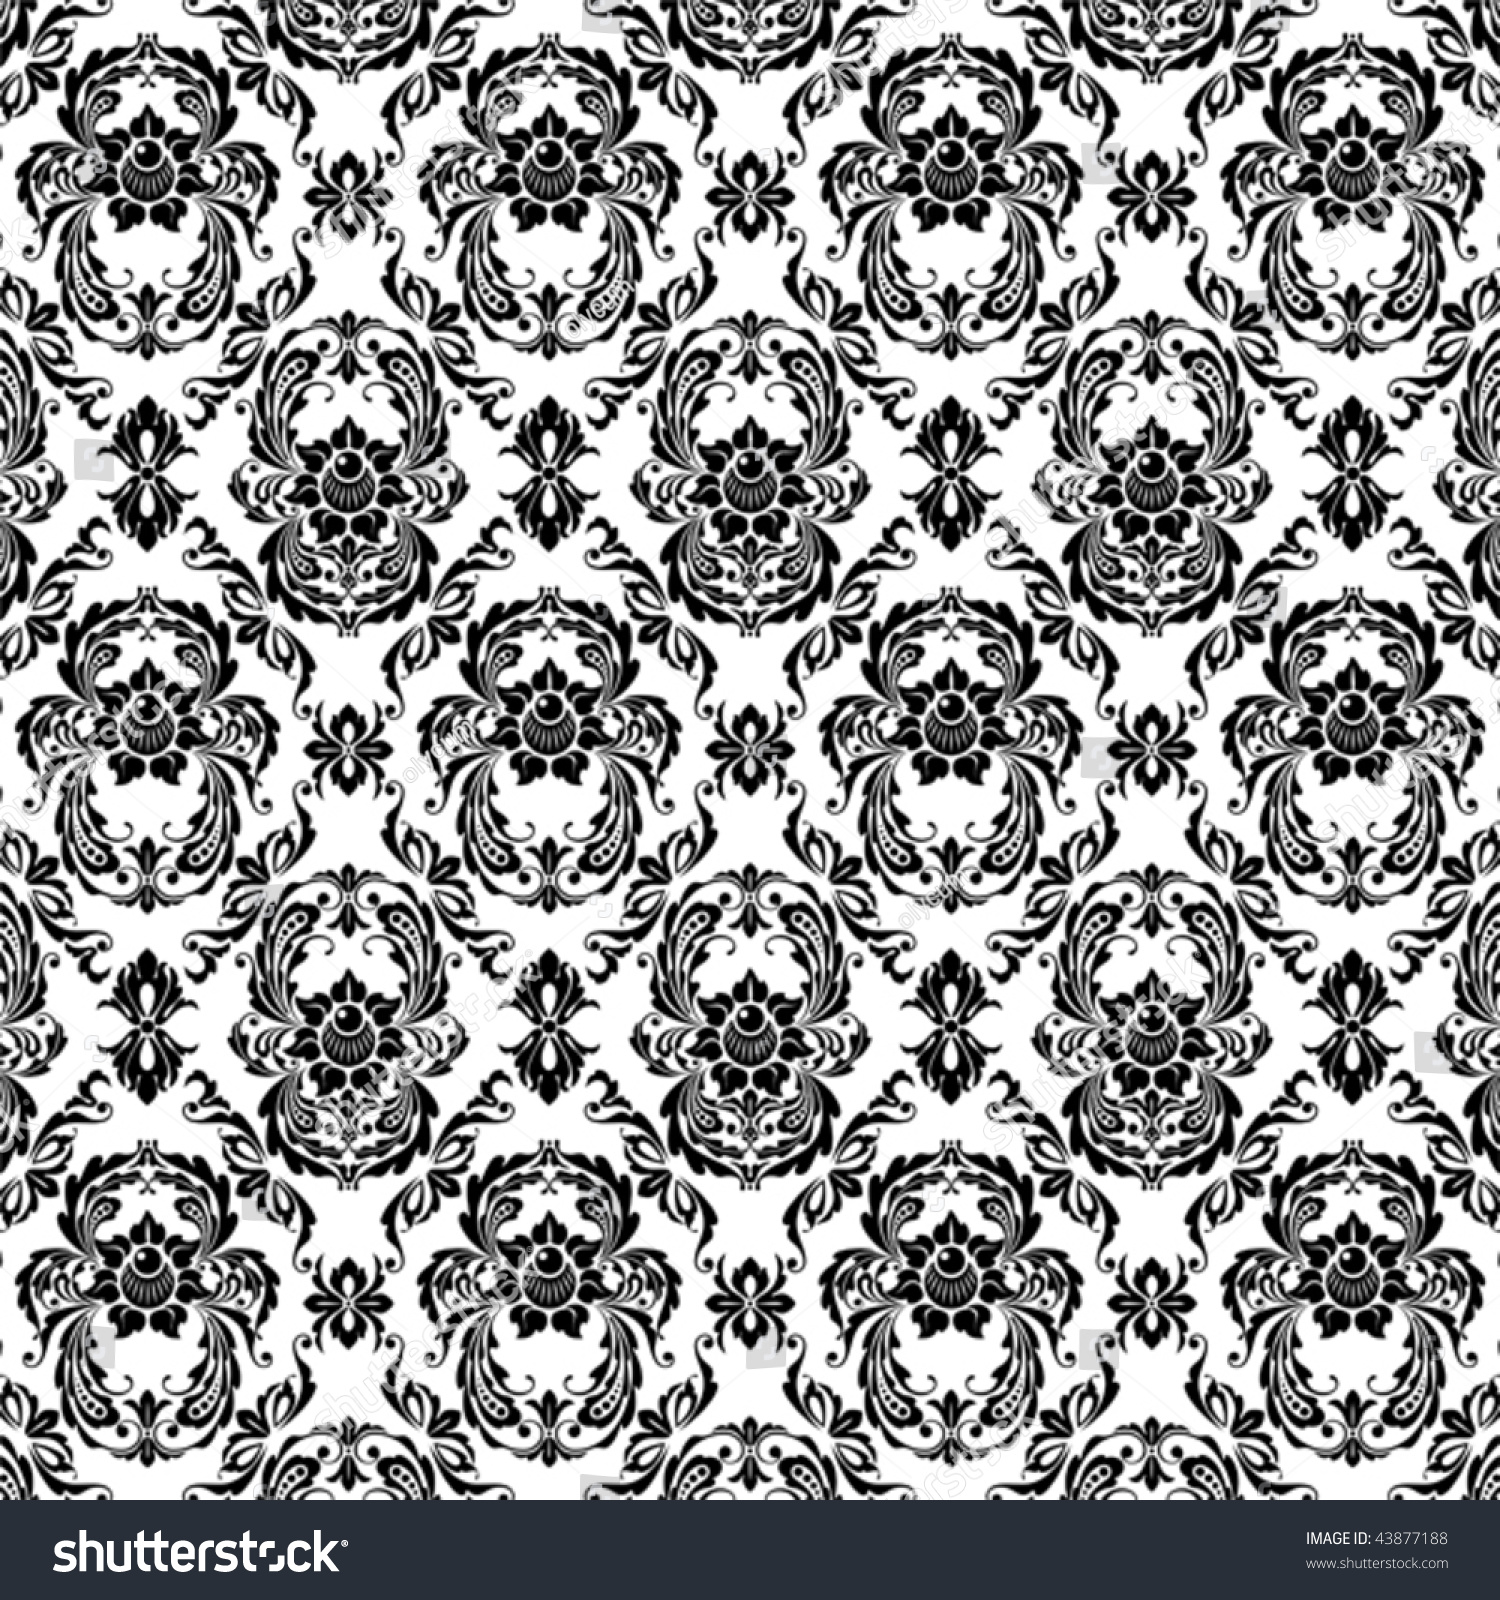 Graceful Decorative Wallpaper With Black Patterns Stock Vector ...